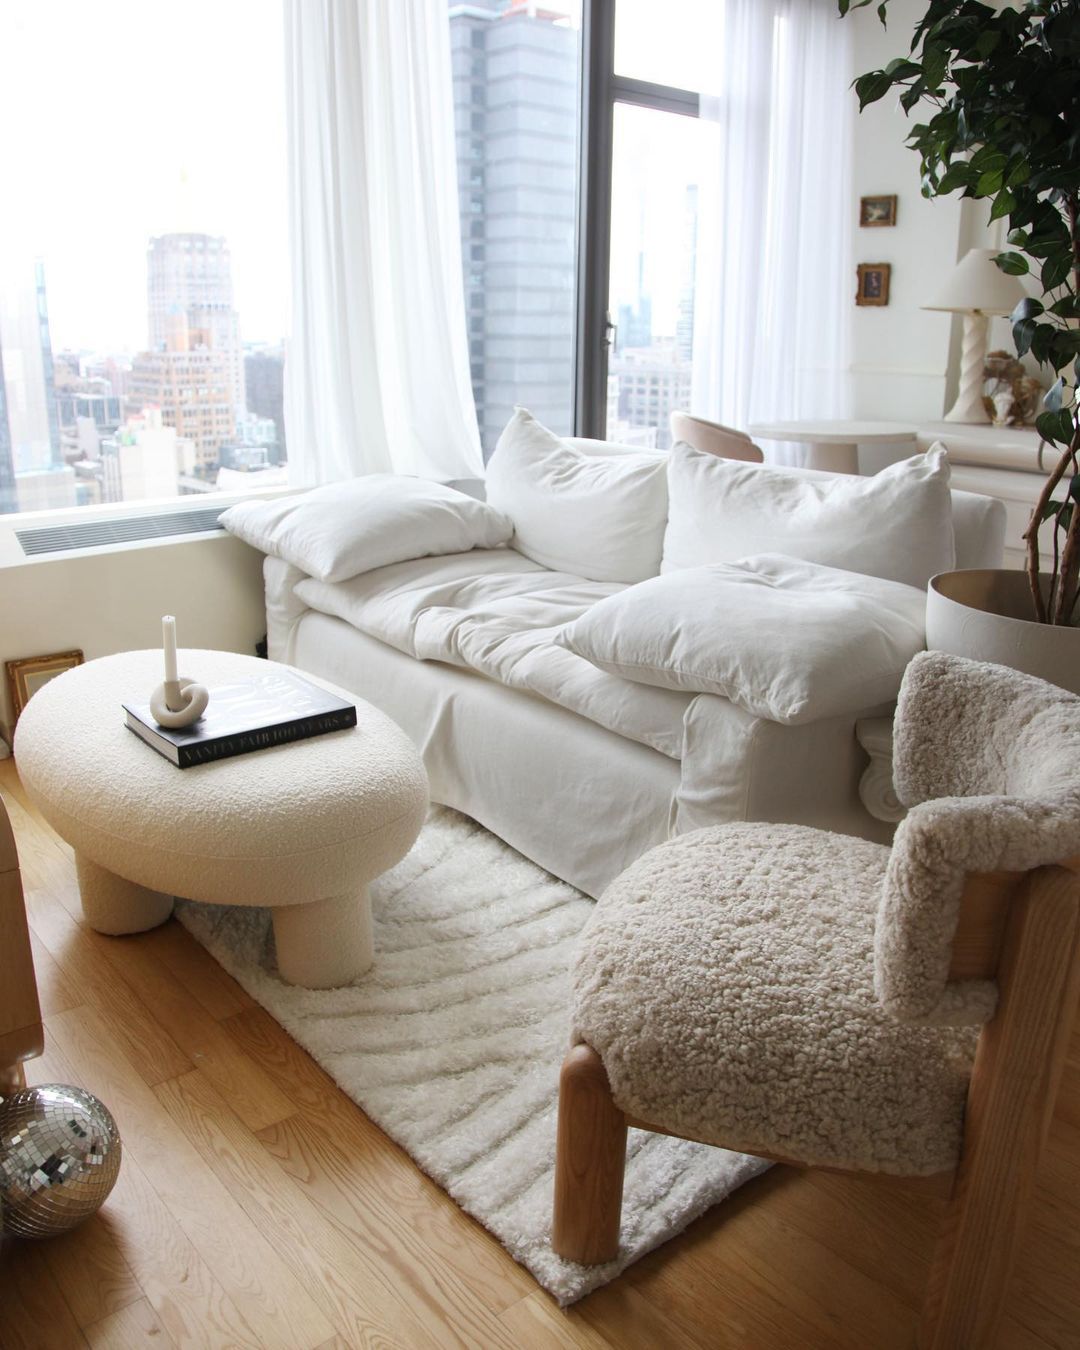 Space-Saving Solutions: The Best Small
Couches for Apartments and Small Rooms